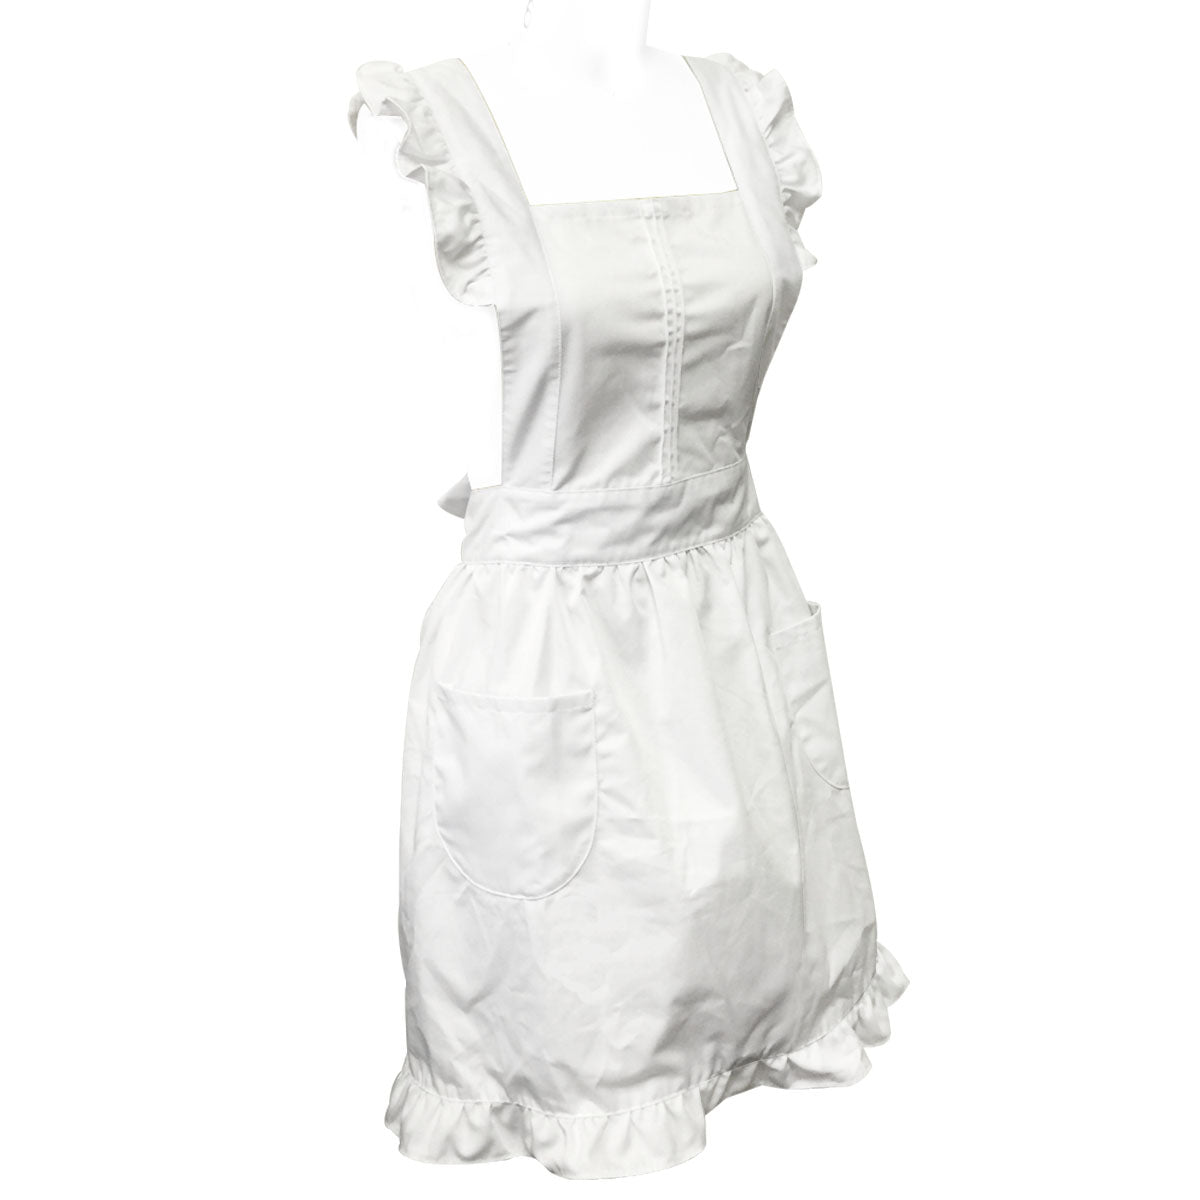 Wrapables Retro White Apron with Pockets for Cooking or Cosplay